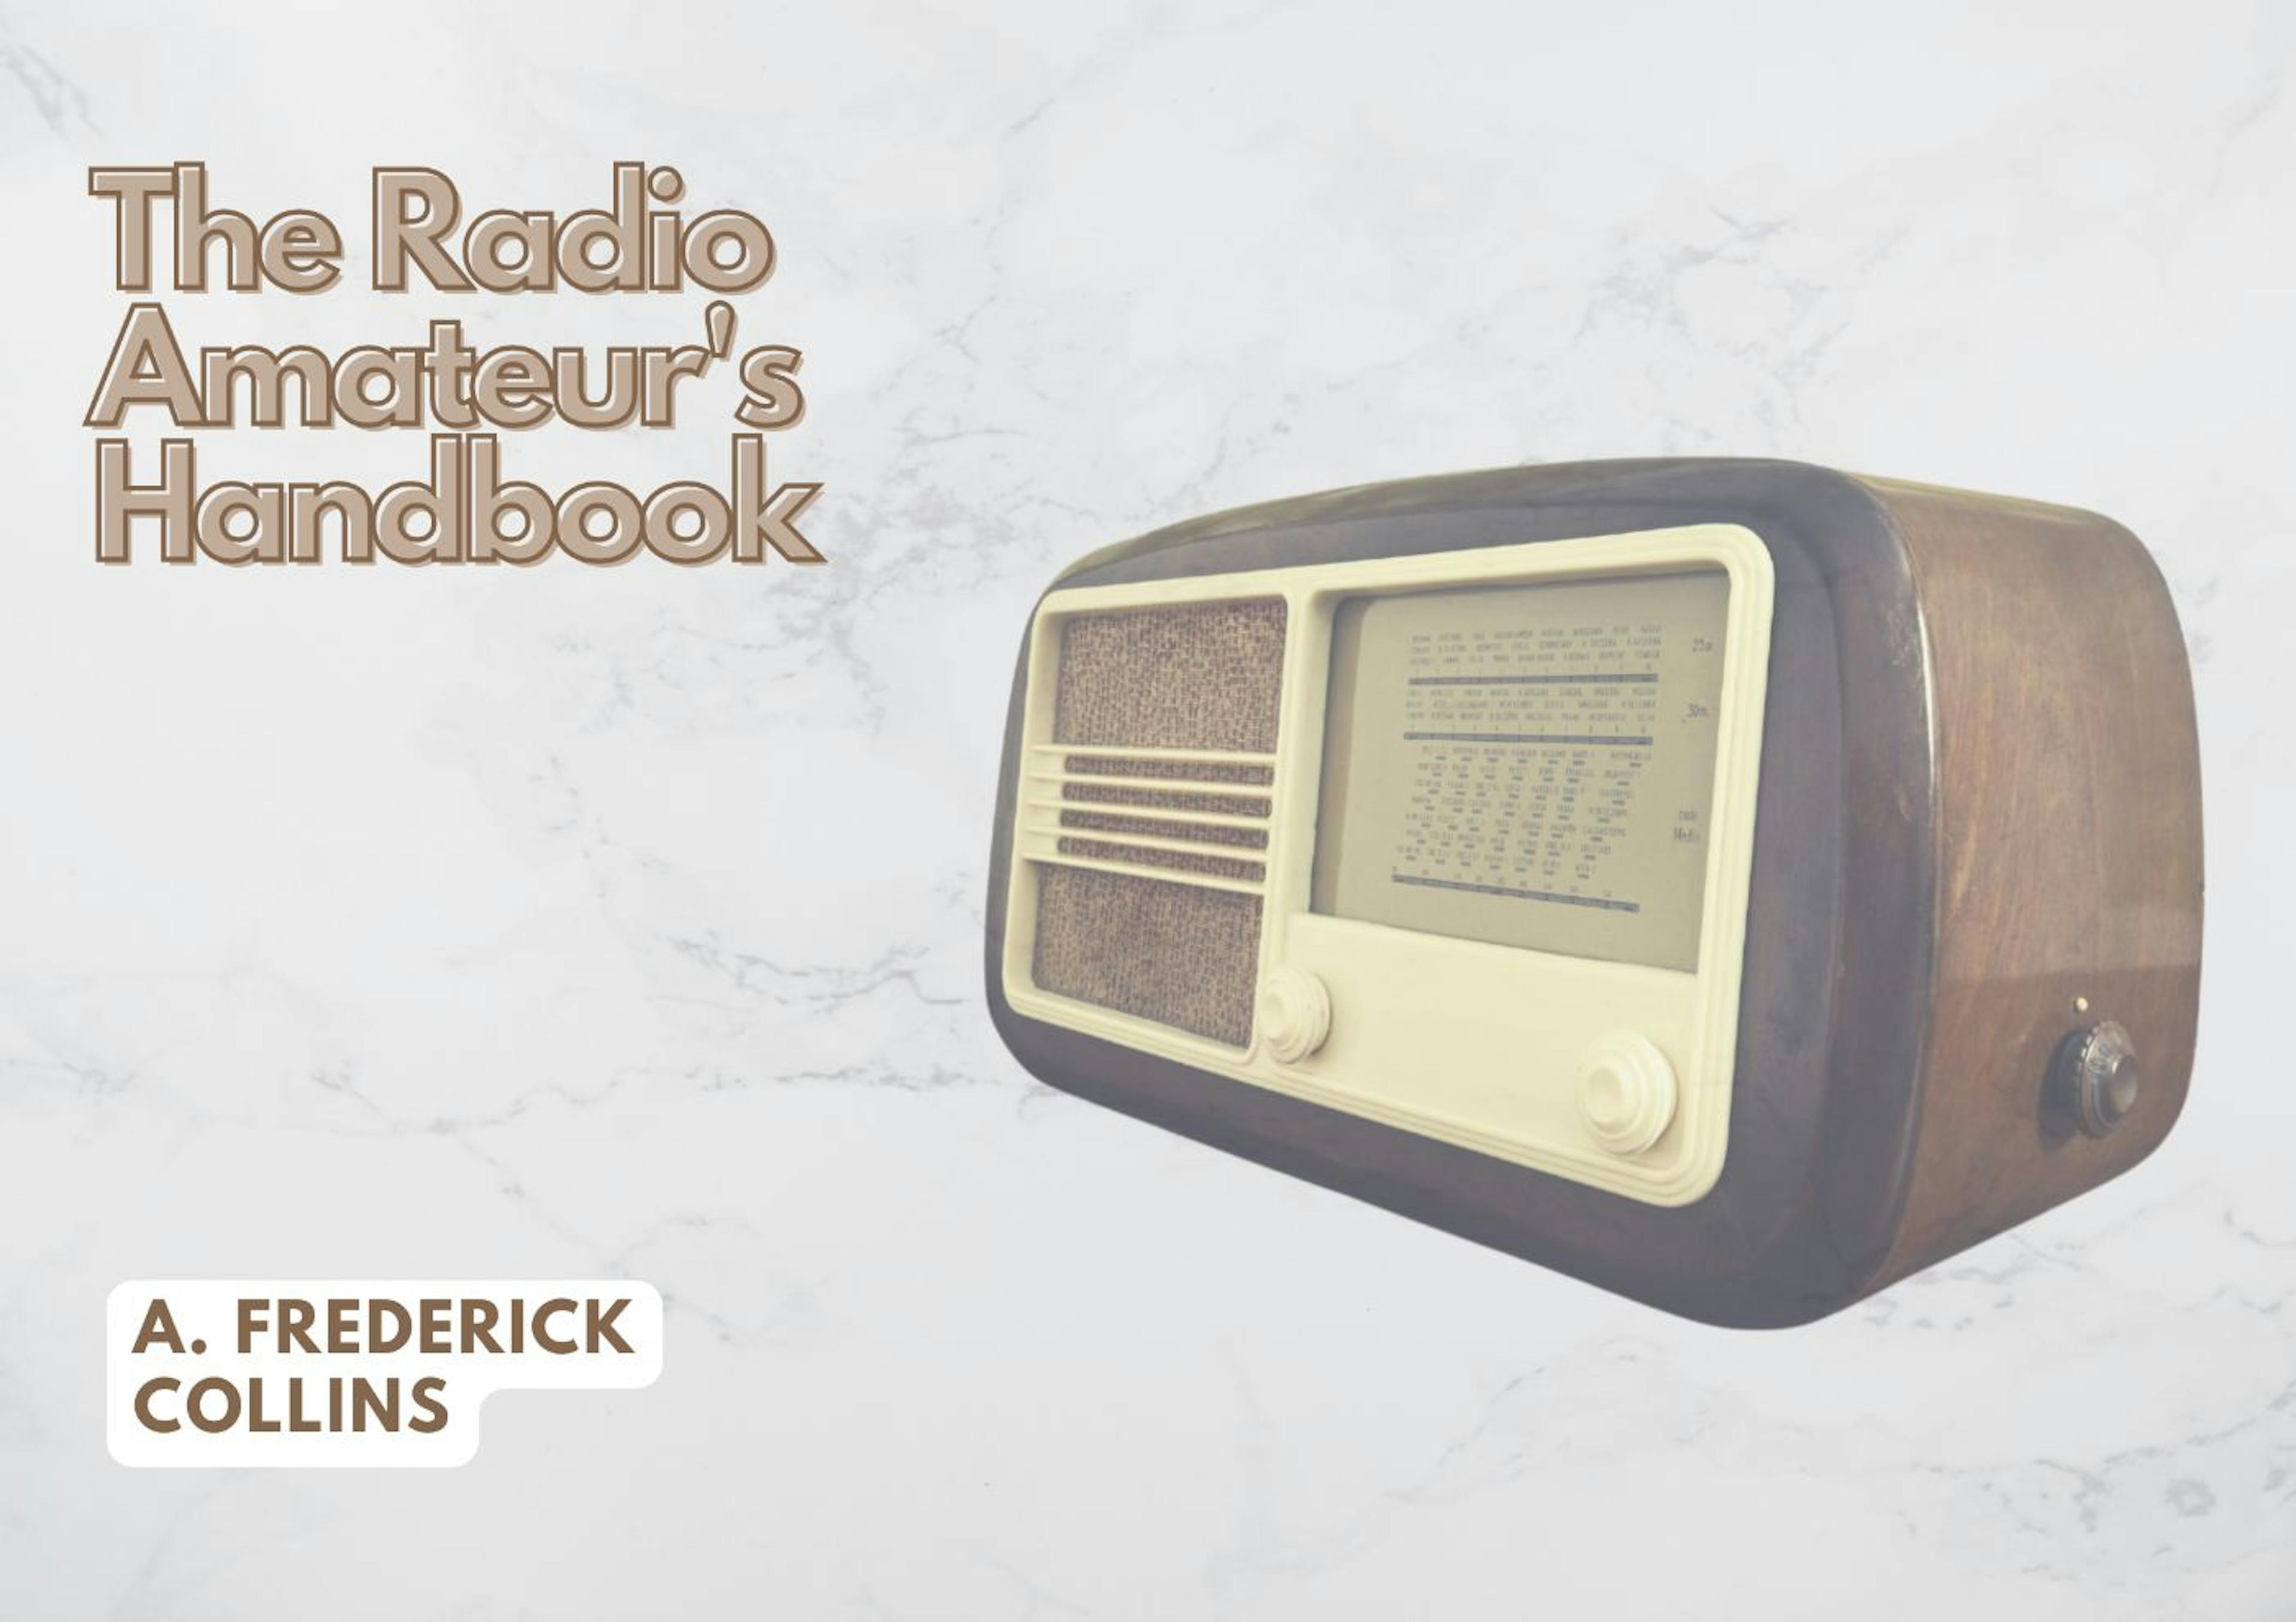 featured image - The Radio Amateur's Hand Book - Table of Links